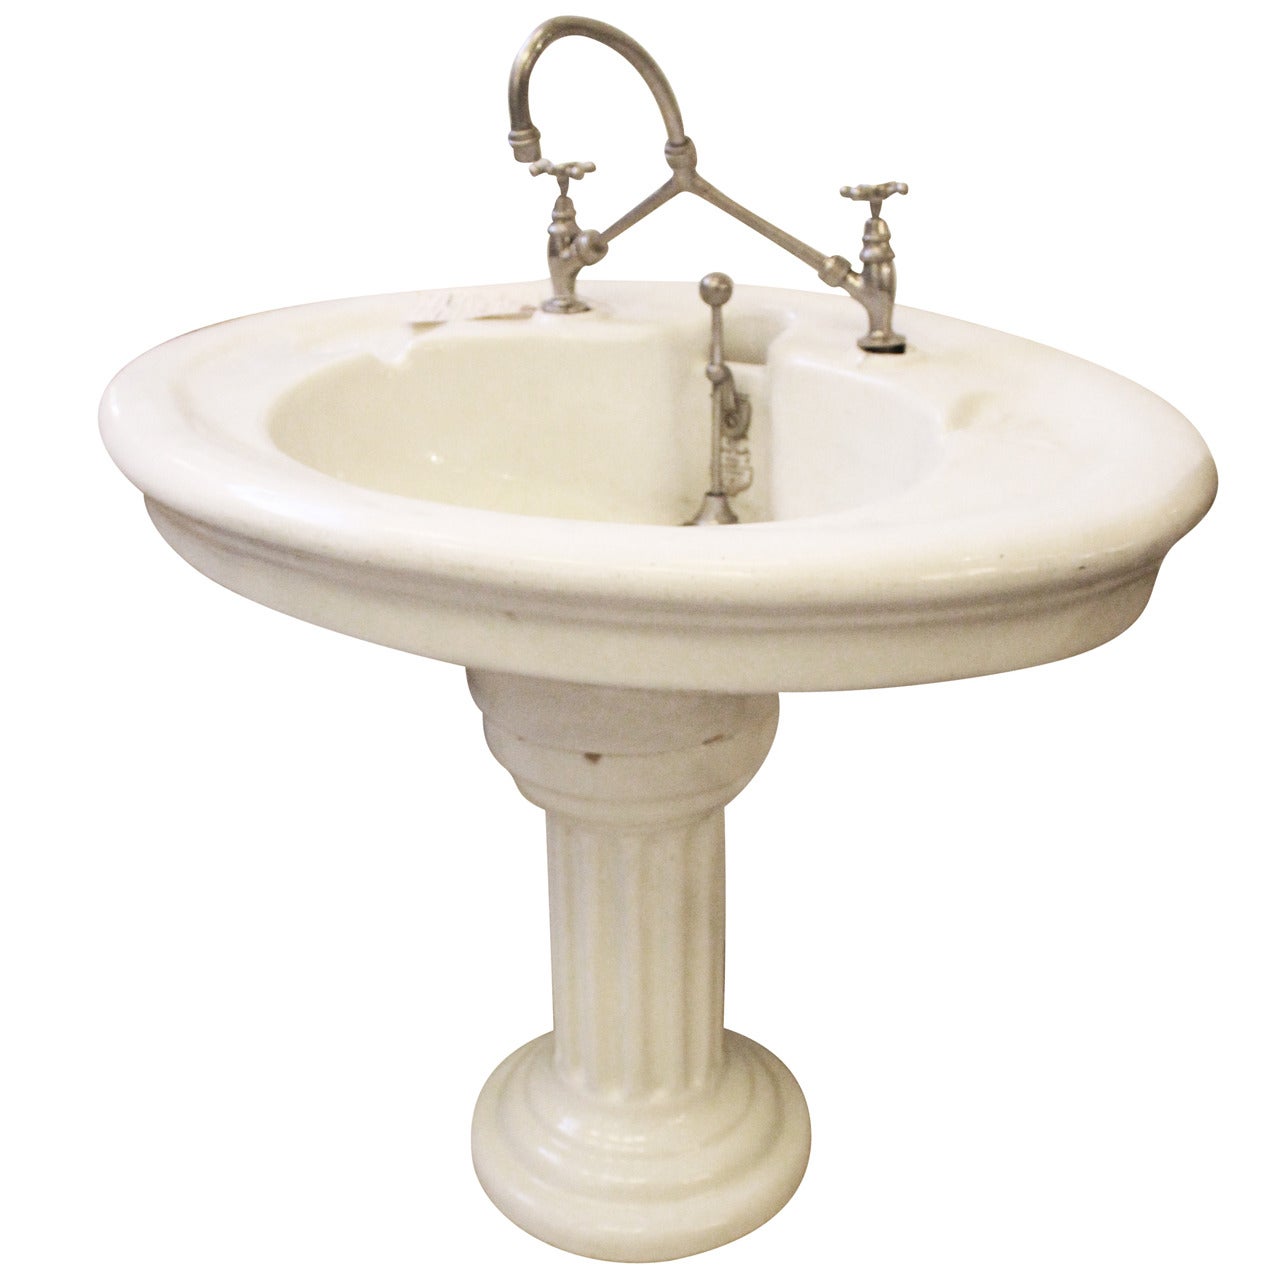 1890s English Doulton and Co. Sanitary Pedestal Sink